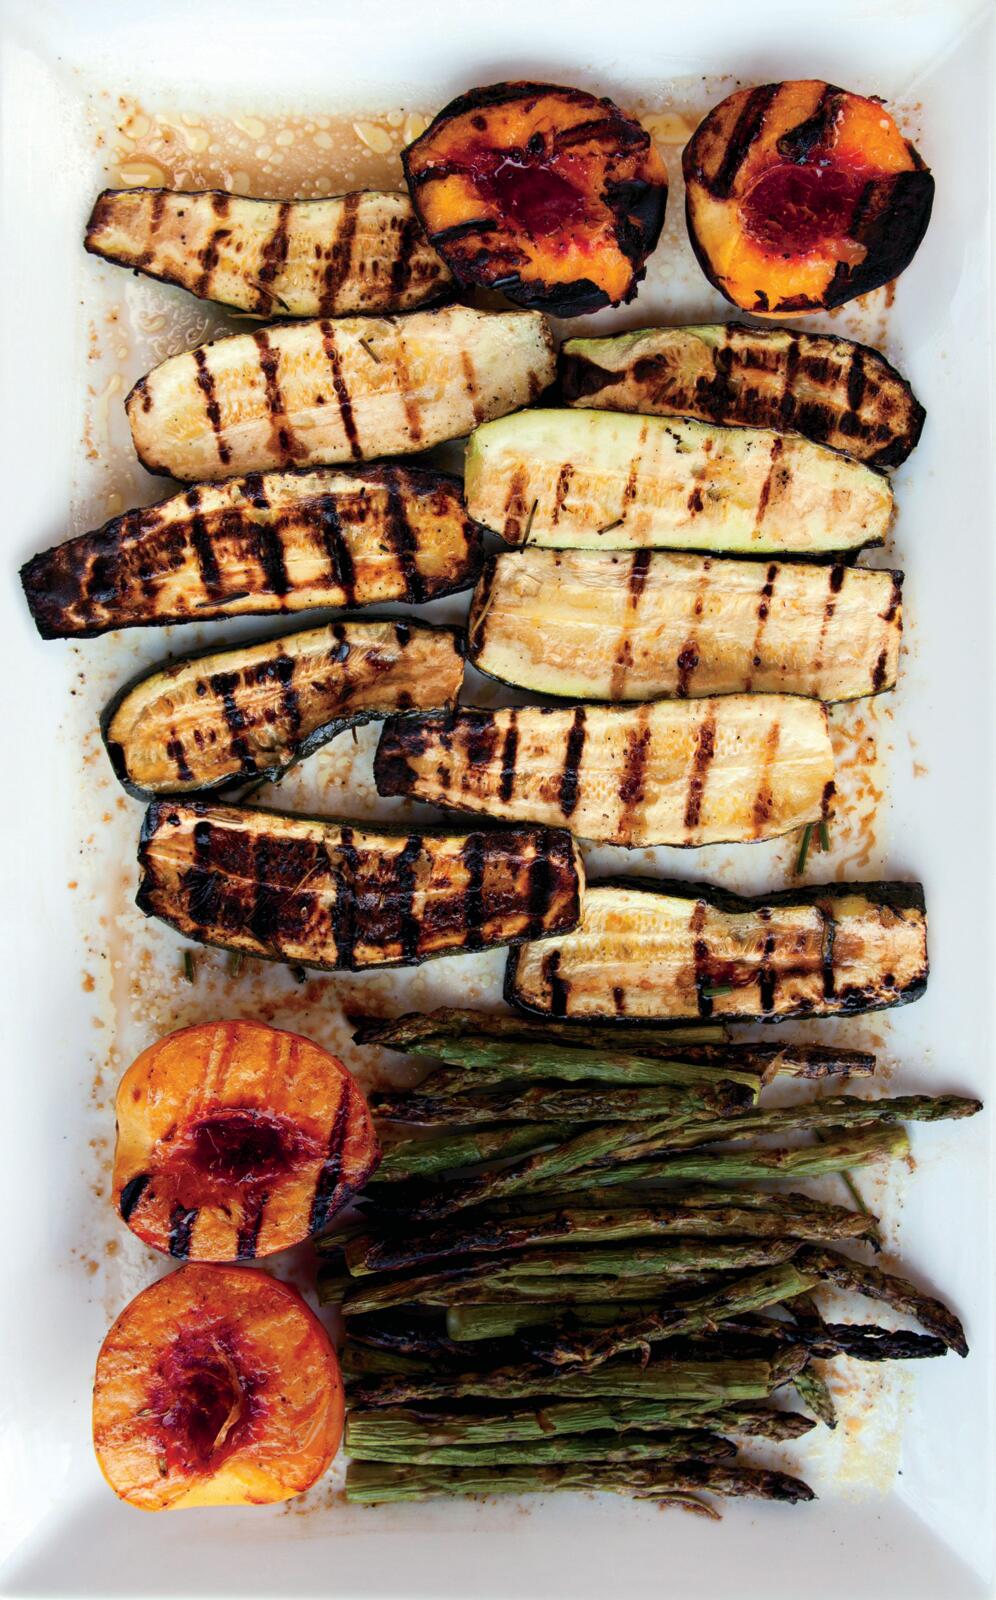 Grill Your Heart Out This Summer With This Expert Guide To Everything From Sauces to Meats